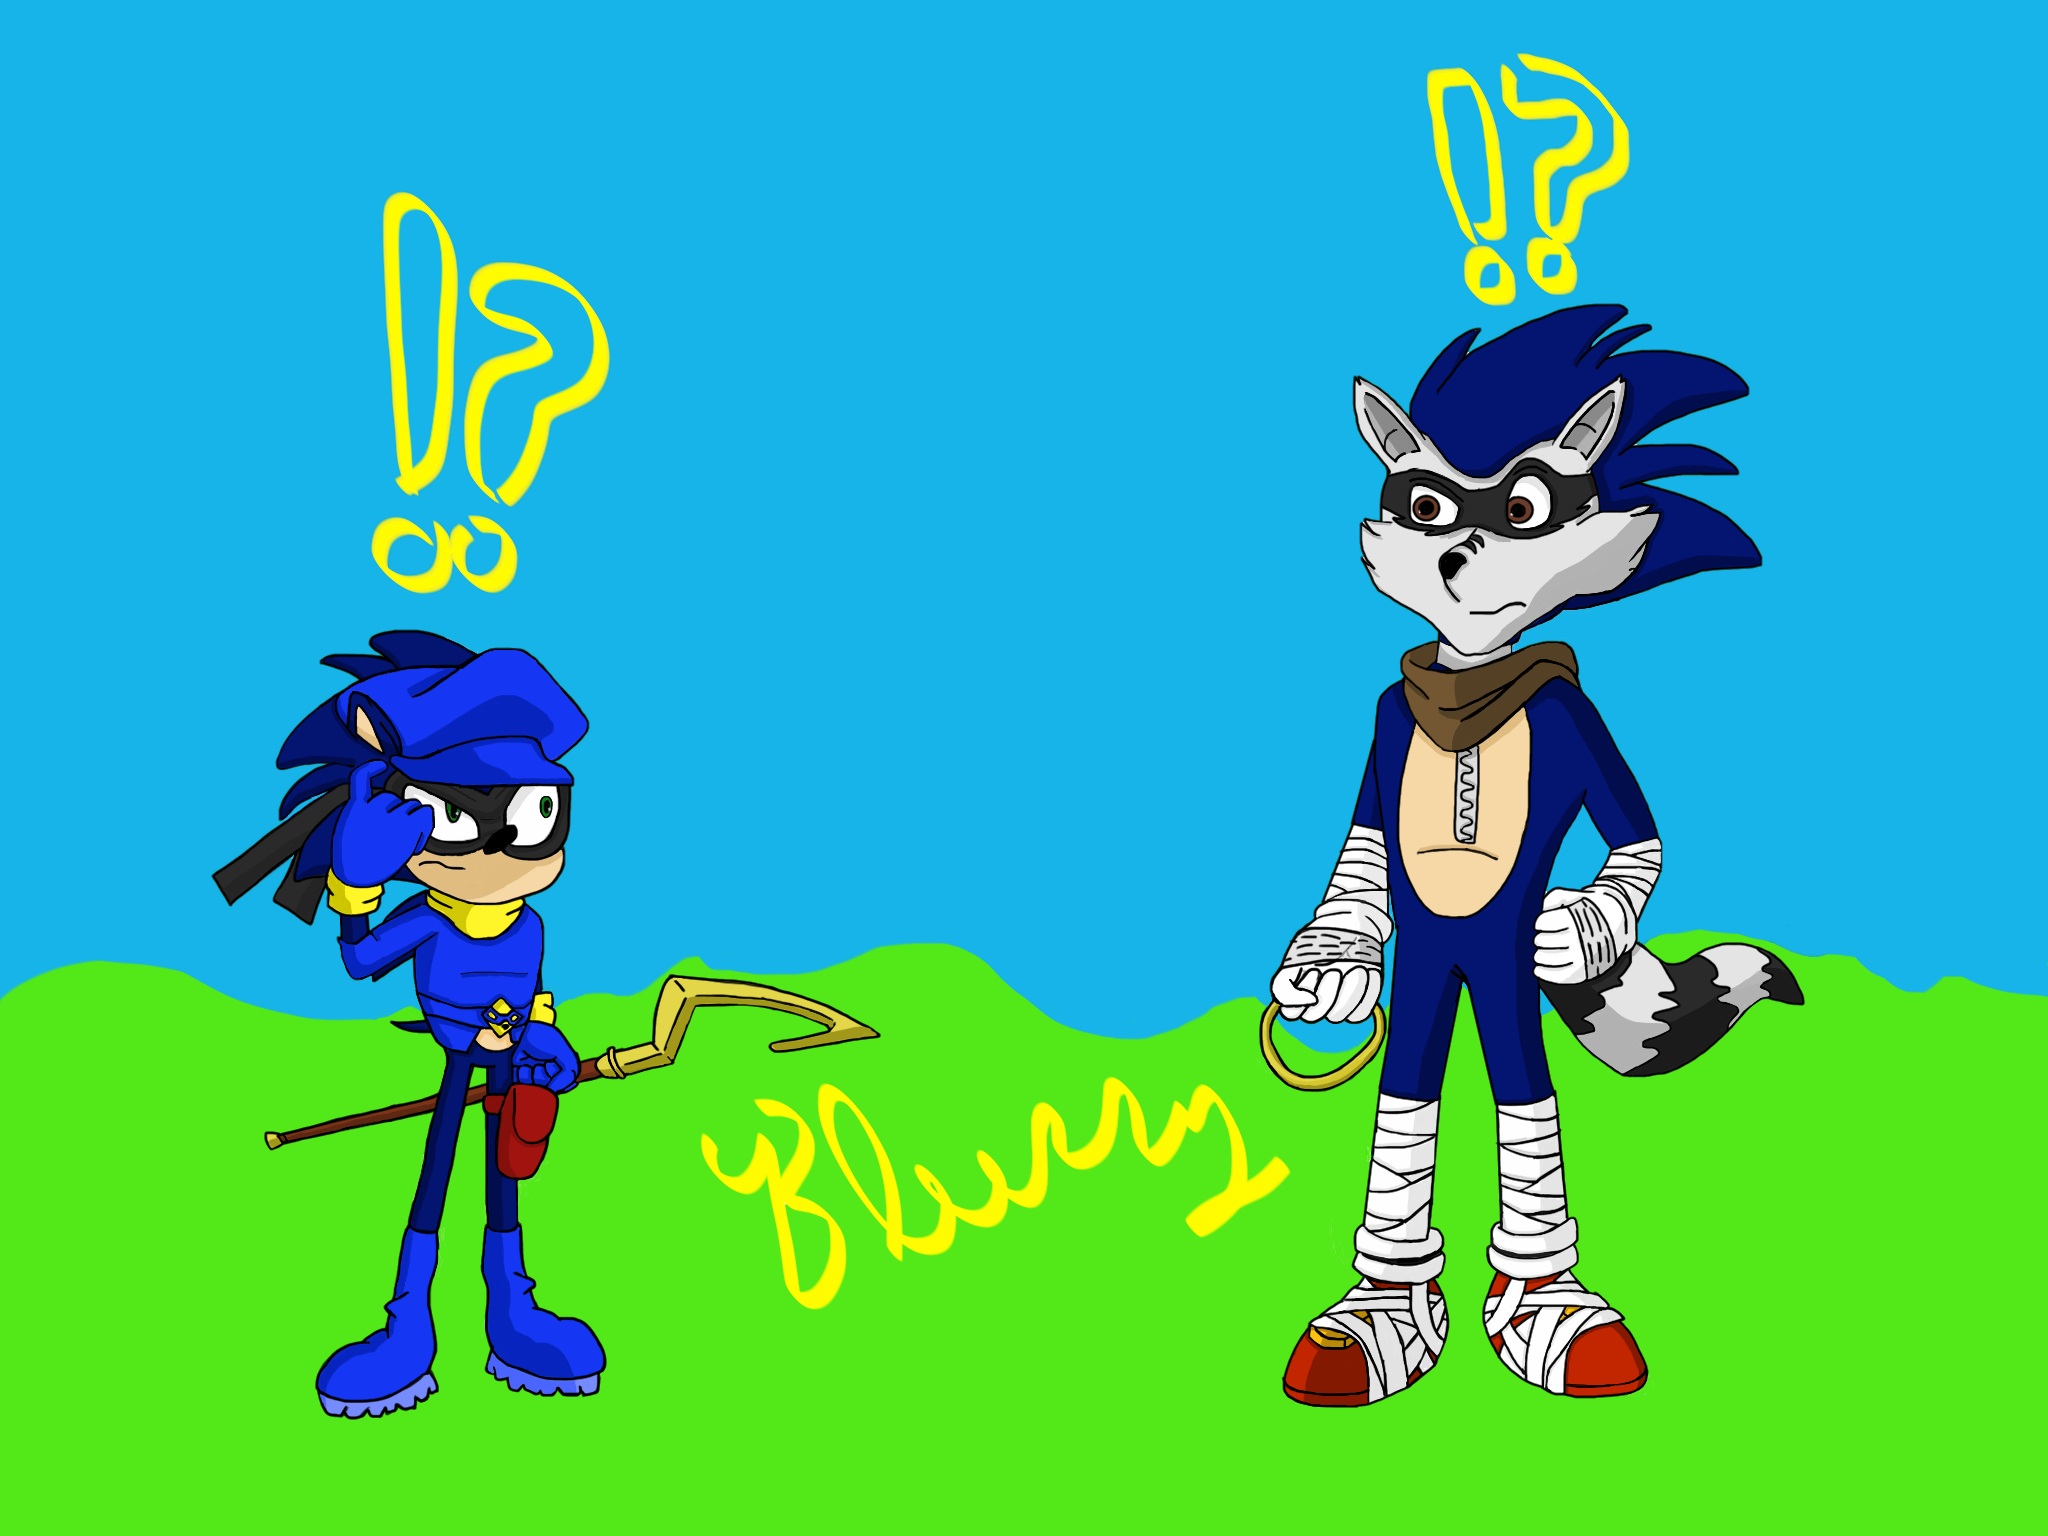 sonic_and_sly__cosplay_confusion_by_blueblur62391-d81biyb.jpg